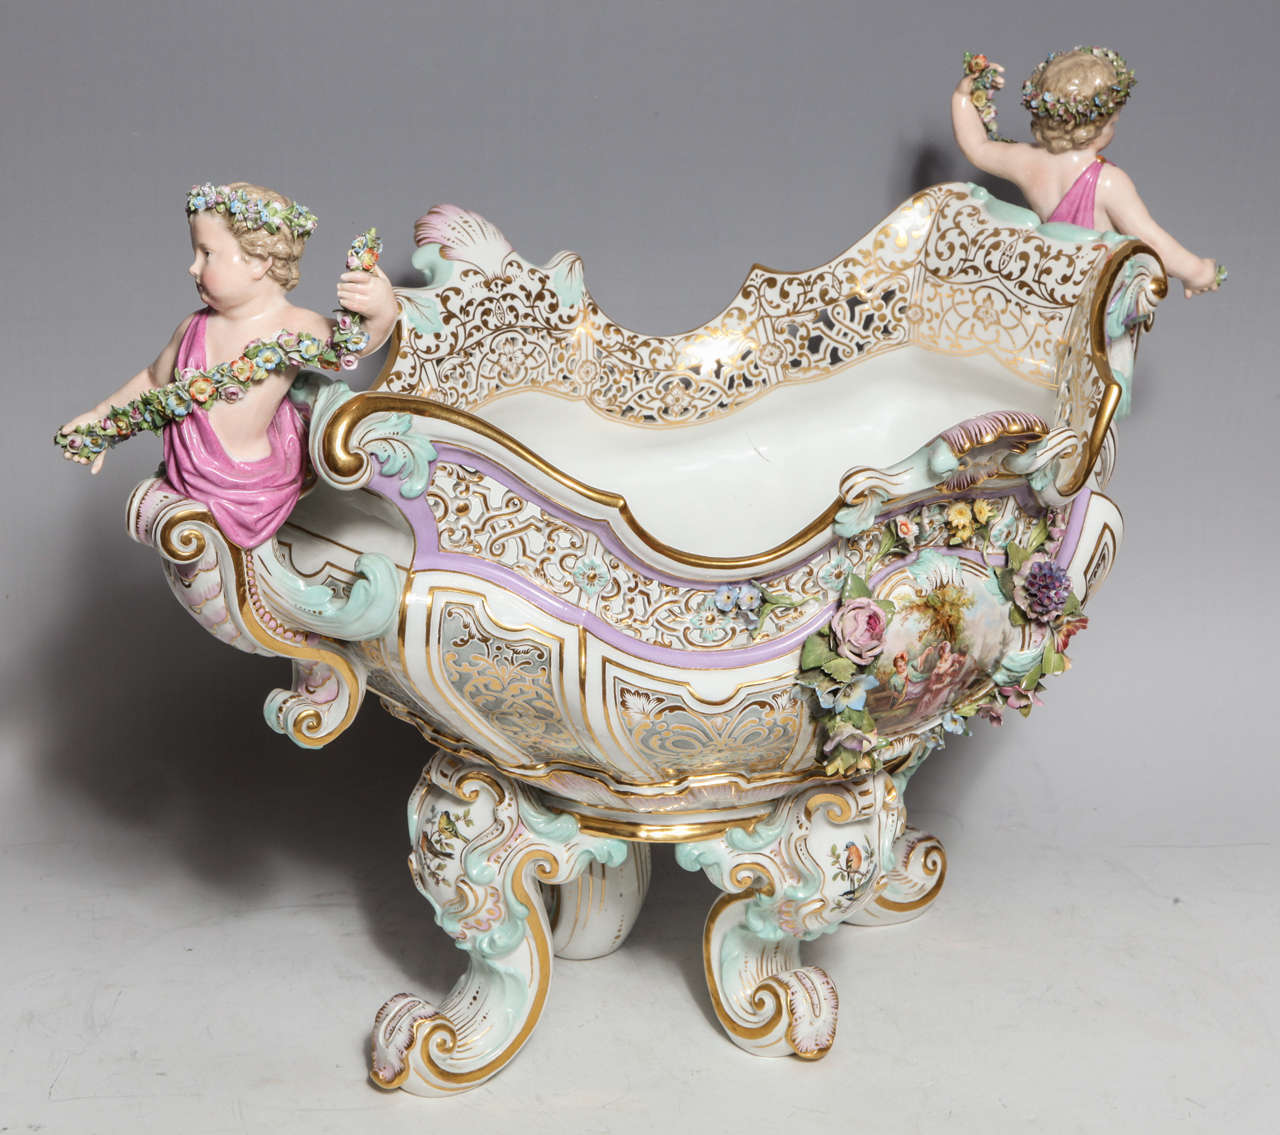 A palatial antique German Meissen porcelain figural centerpiece of exquisite detail embellished with reticulated border, raised flowers, hand painted lover scenes & further adorned with two figures of puttis with garlands of flowers,signed with the